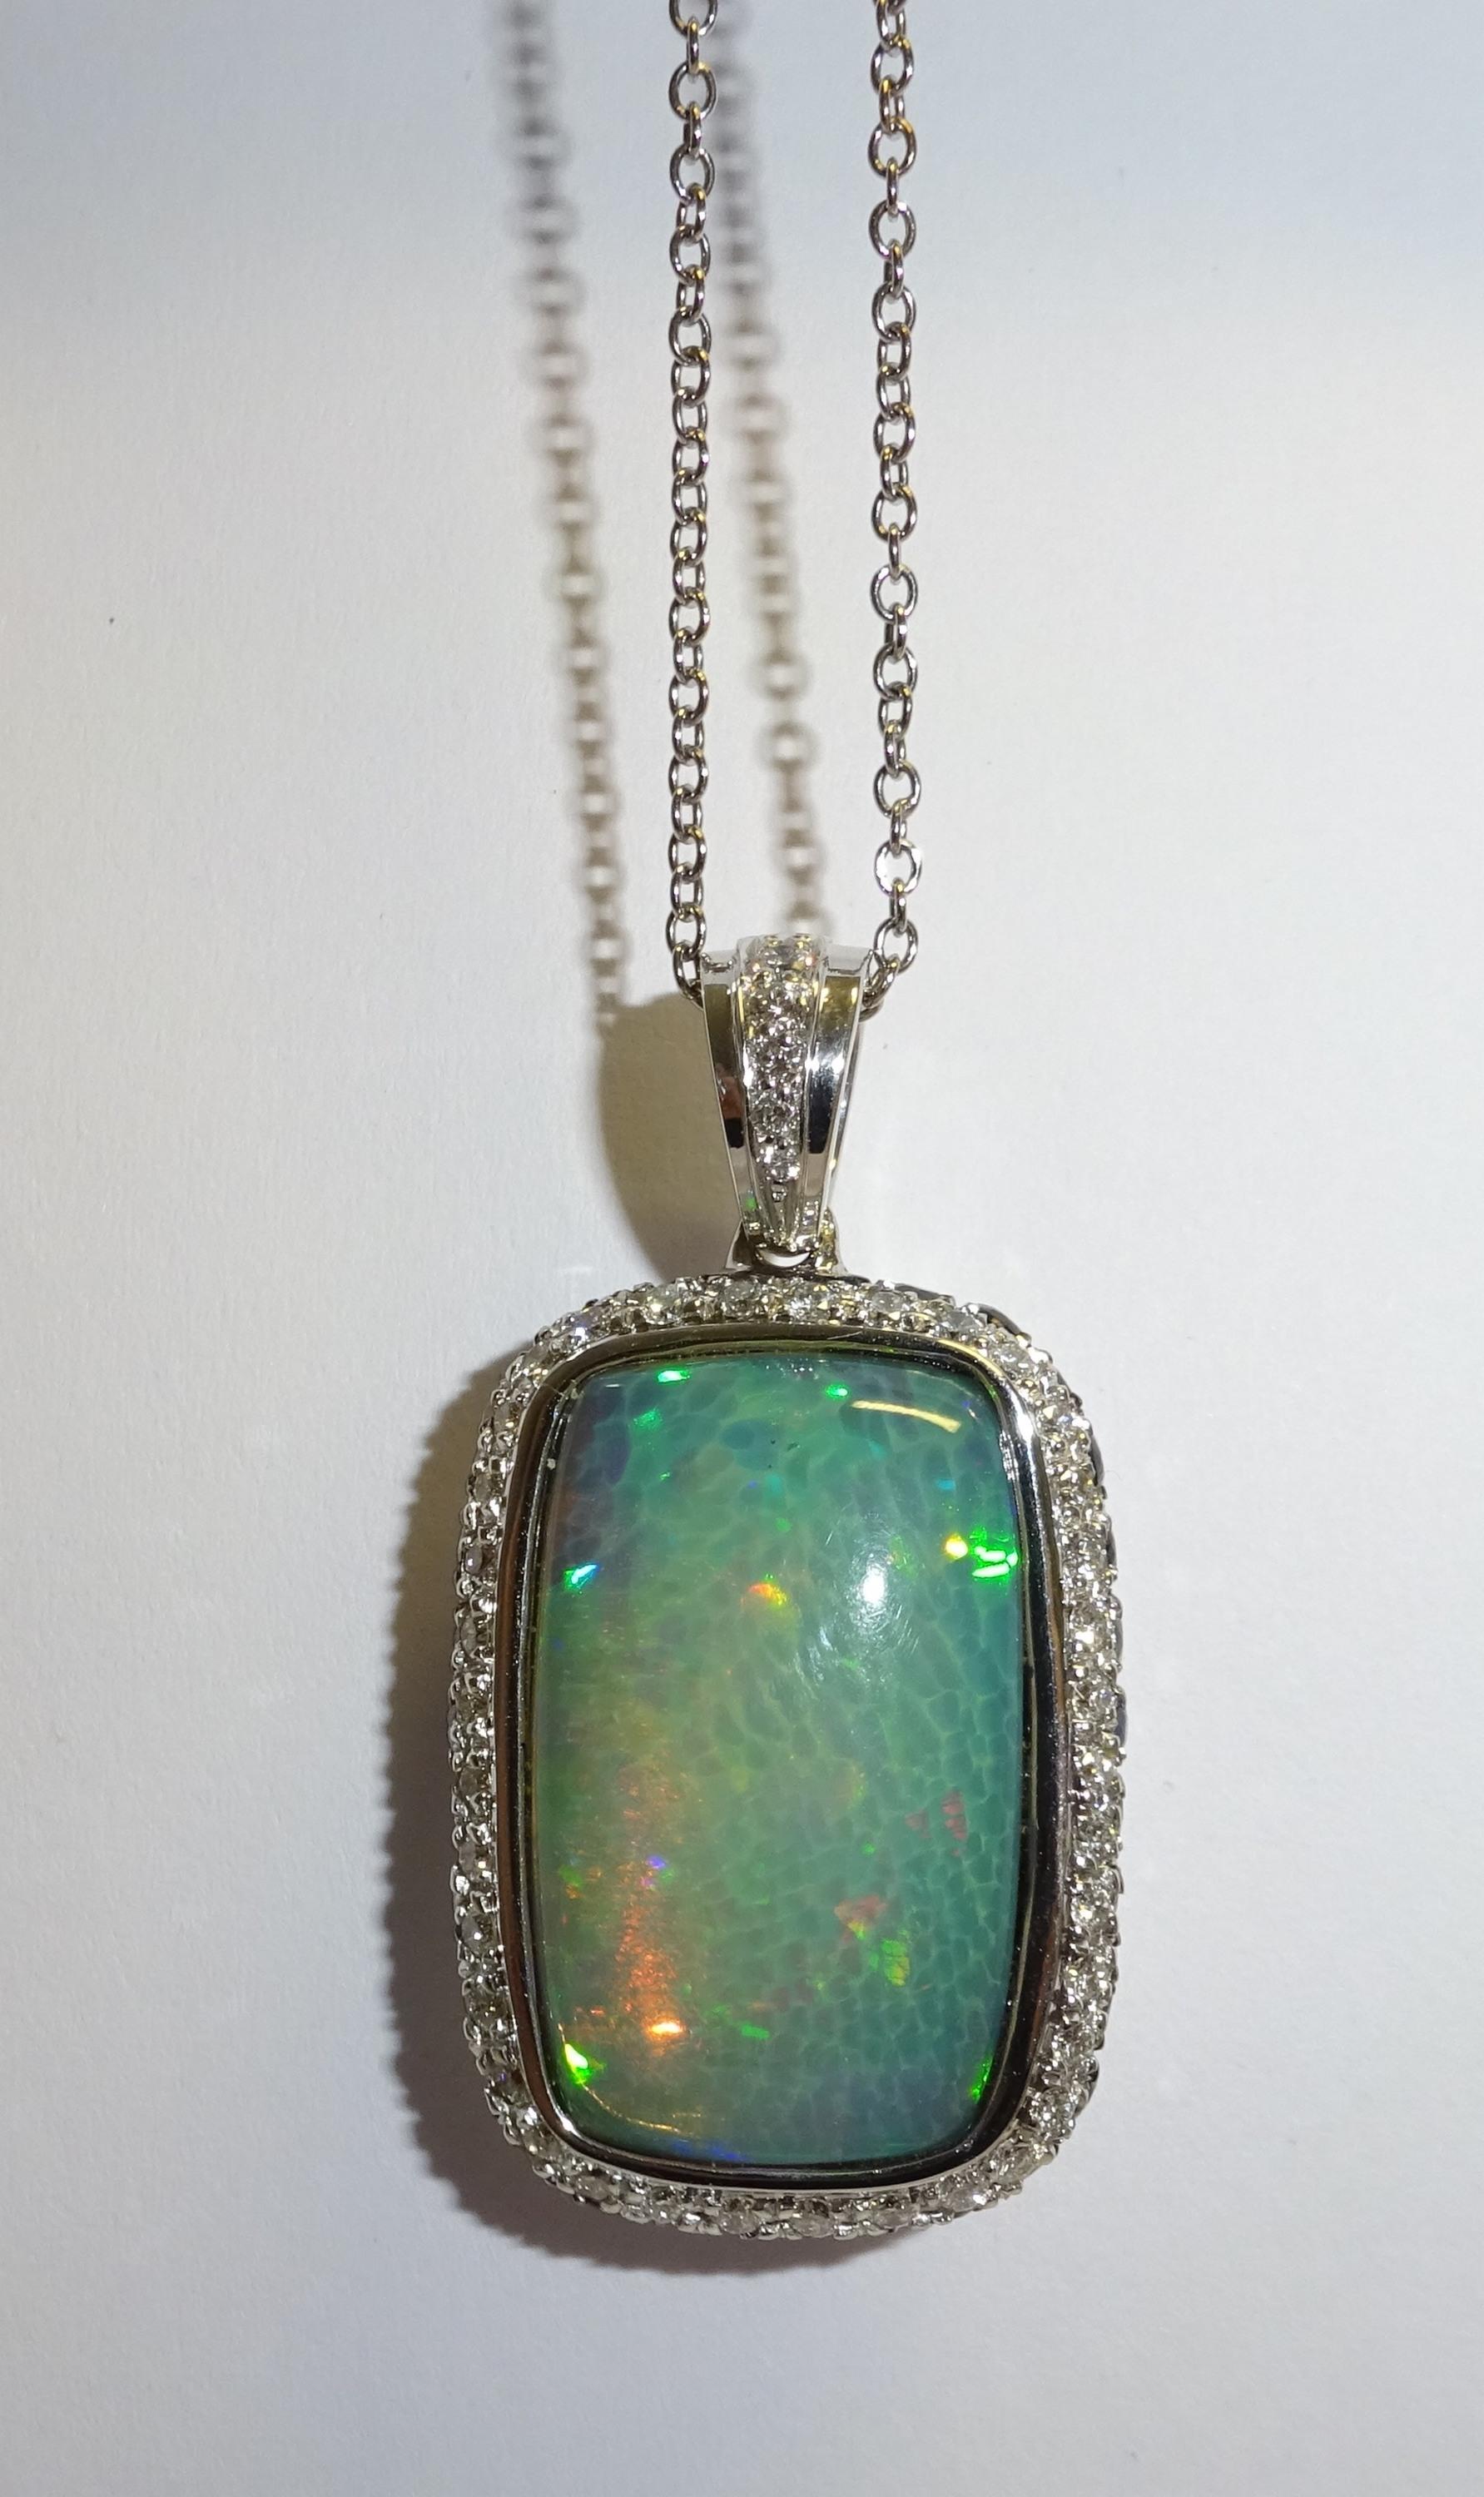 18 Karat White Gold  Diamonds  and Opal Pendant Necklace

42 Diamonds 0.46 ct. G-SI
29 Sapphire Black 0.48 ct.
1 opal 10.30  ct




Founded in 1974, Gianni Lazzaro is a family-owned jewelery company based out of Düsseldorf, Germany.
Although rooted